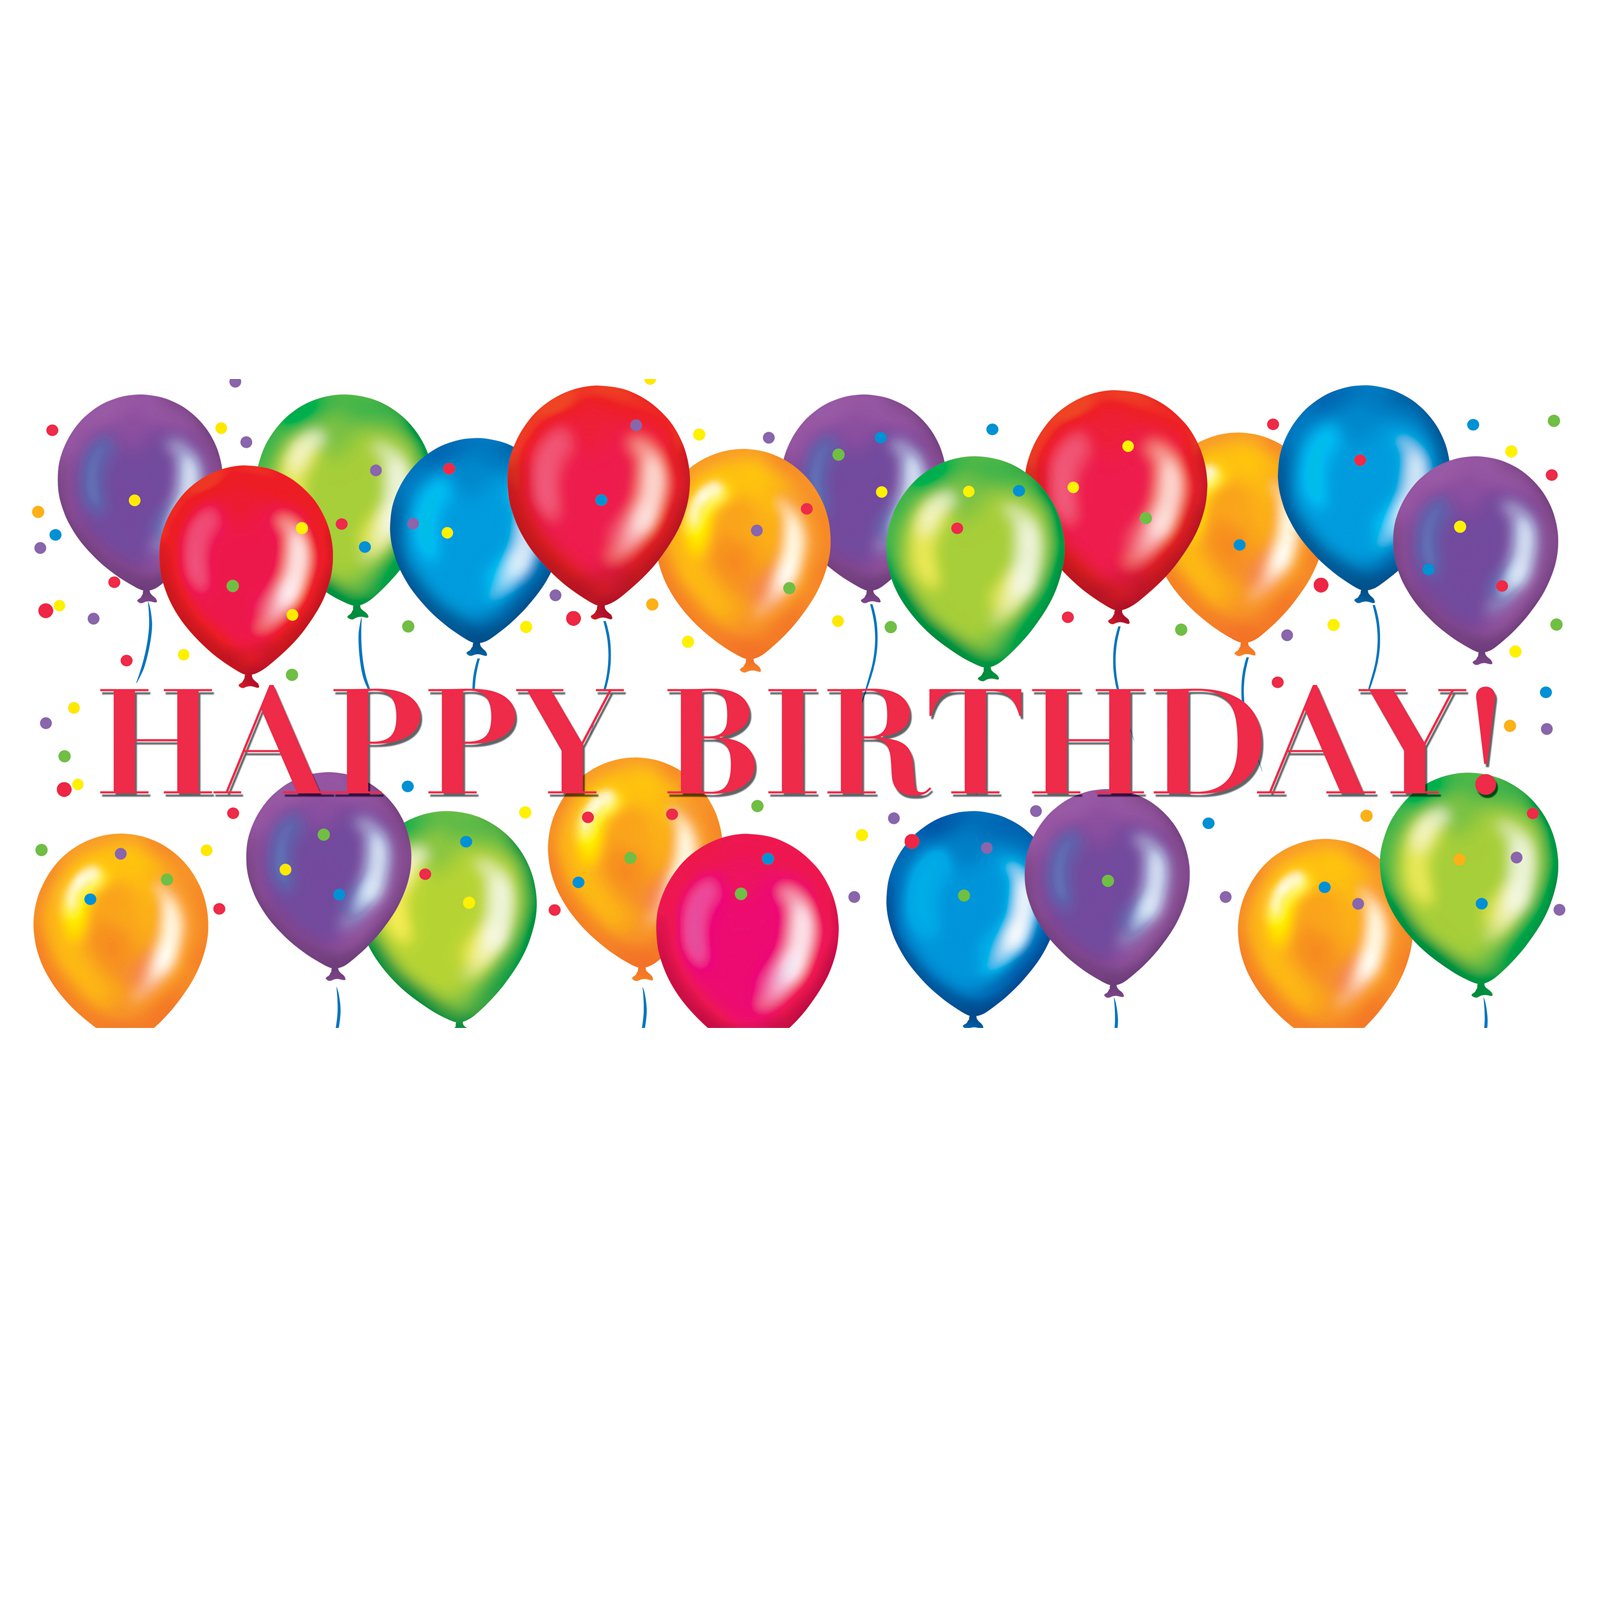 Birthday balloons pictures clip art